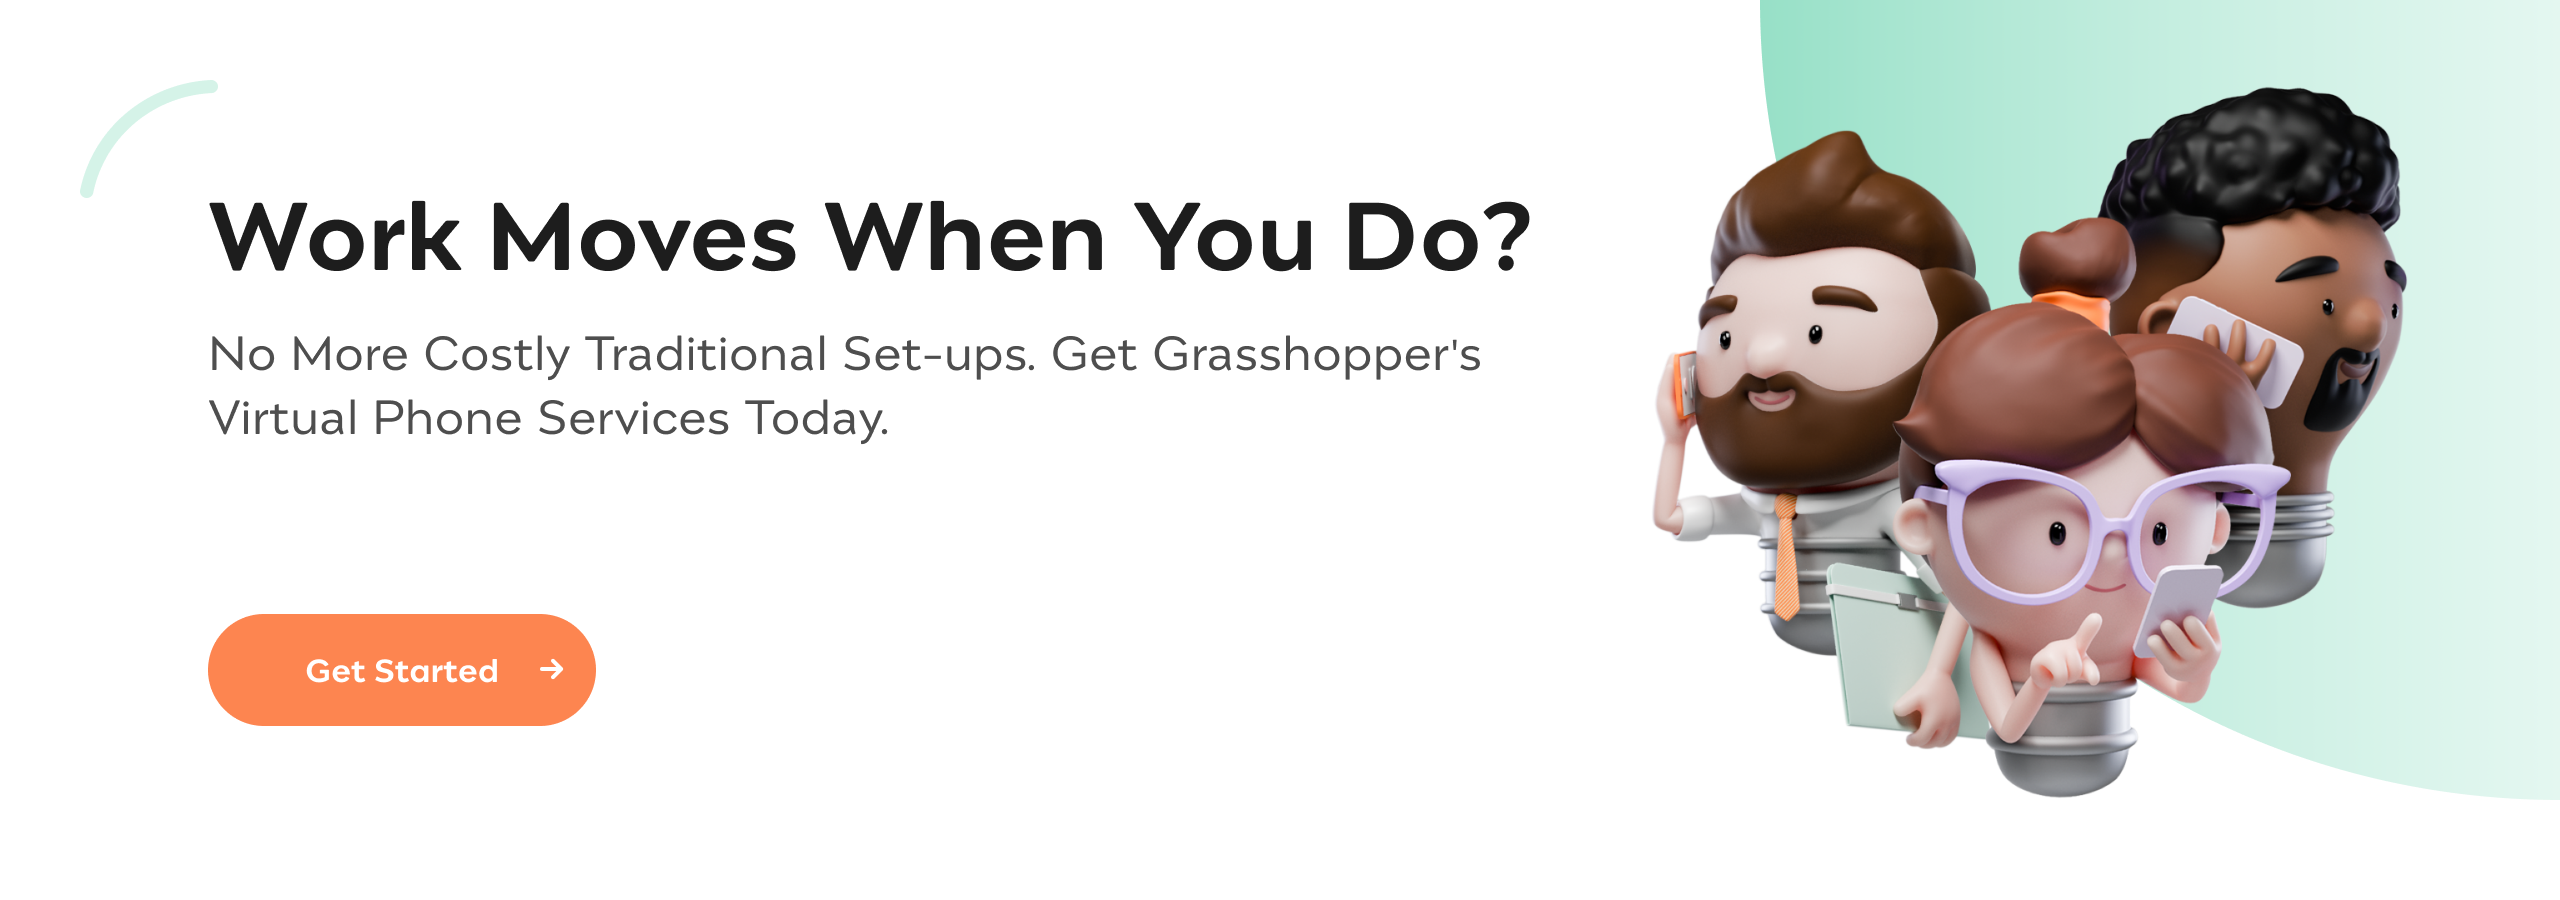 What Work Moves When You Do? No More Costly Traditional Set-ups. Get Grasshopper's Virtual Phone Services Today.